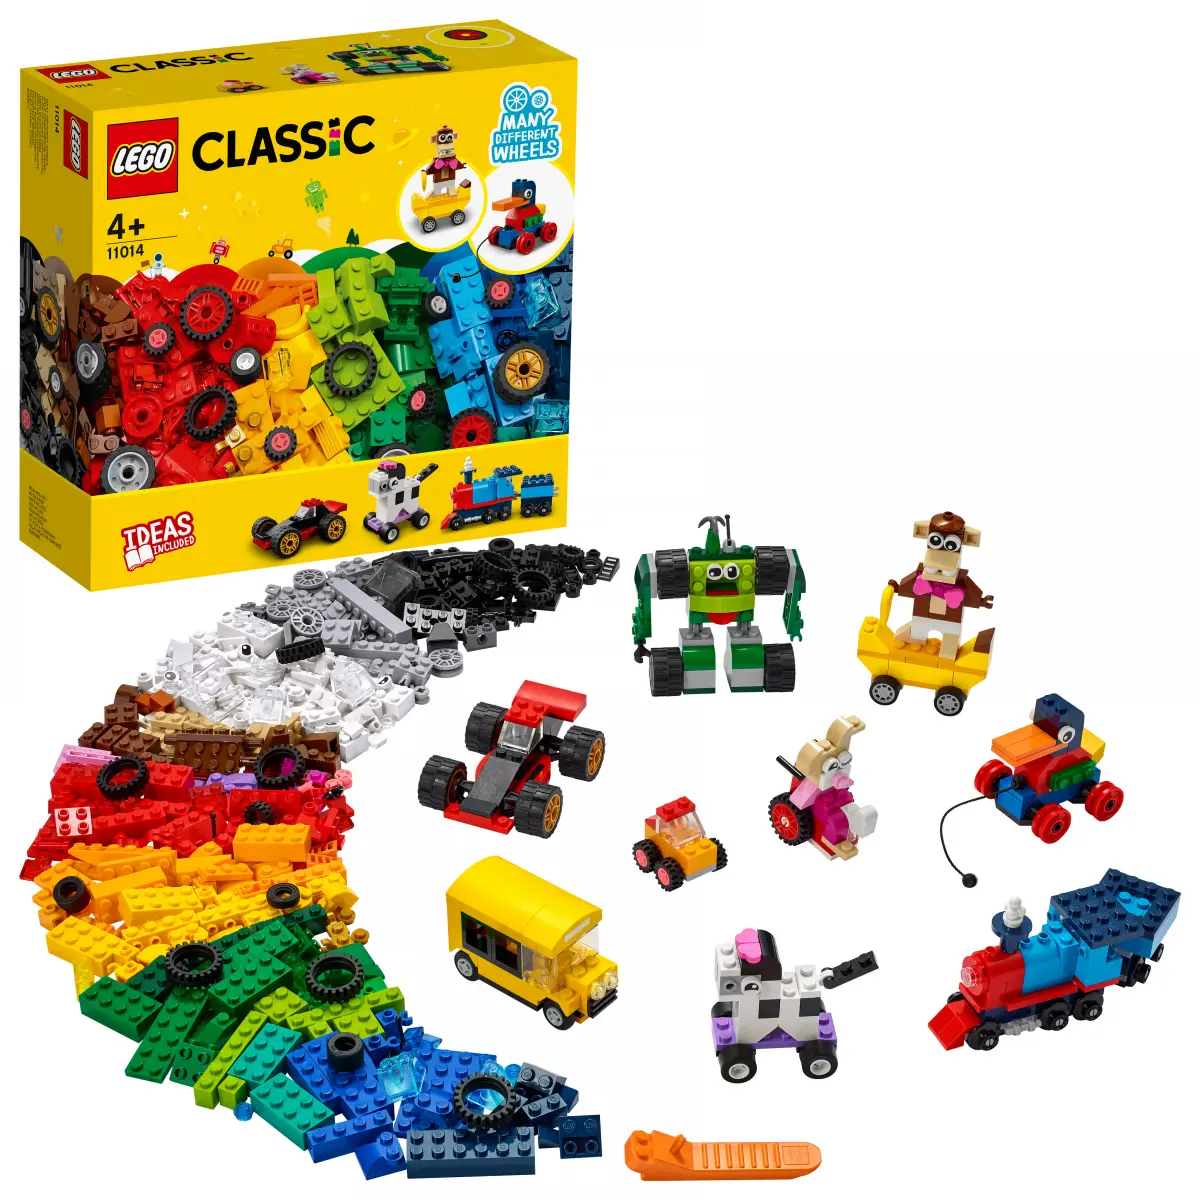 Lego Classic Bricks And Wheels 11014 Kids Building Kit (653 Pieces)